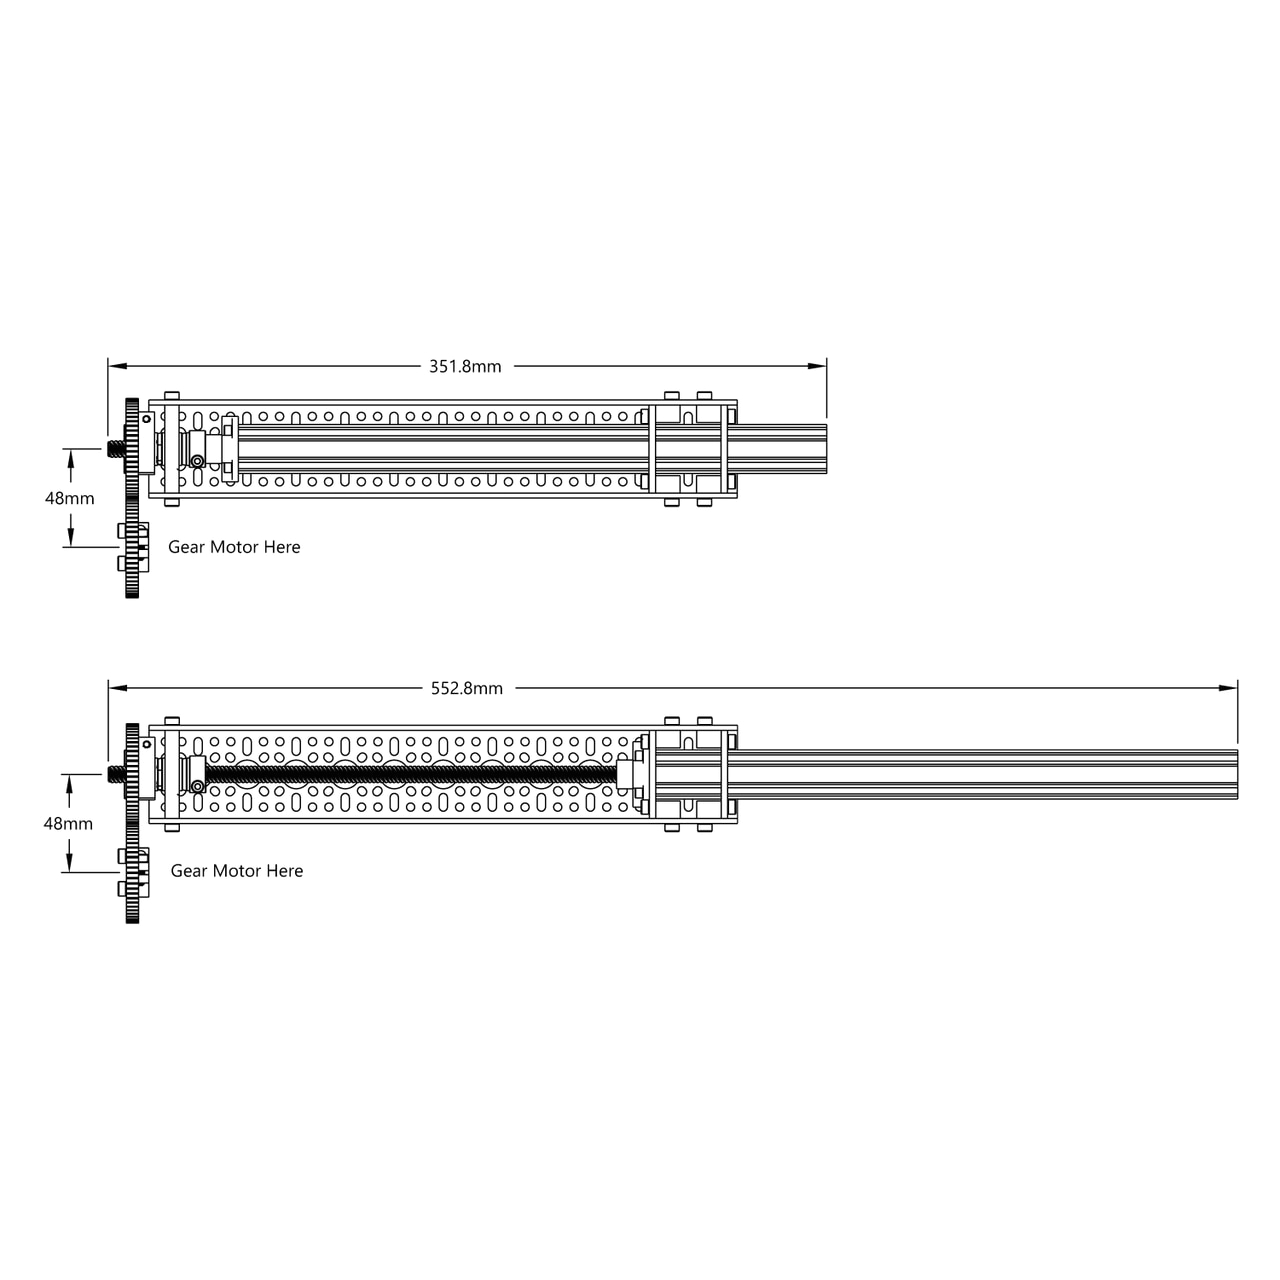 linear actuator kit 3212 0001 0001 schematic